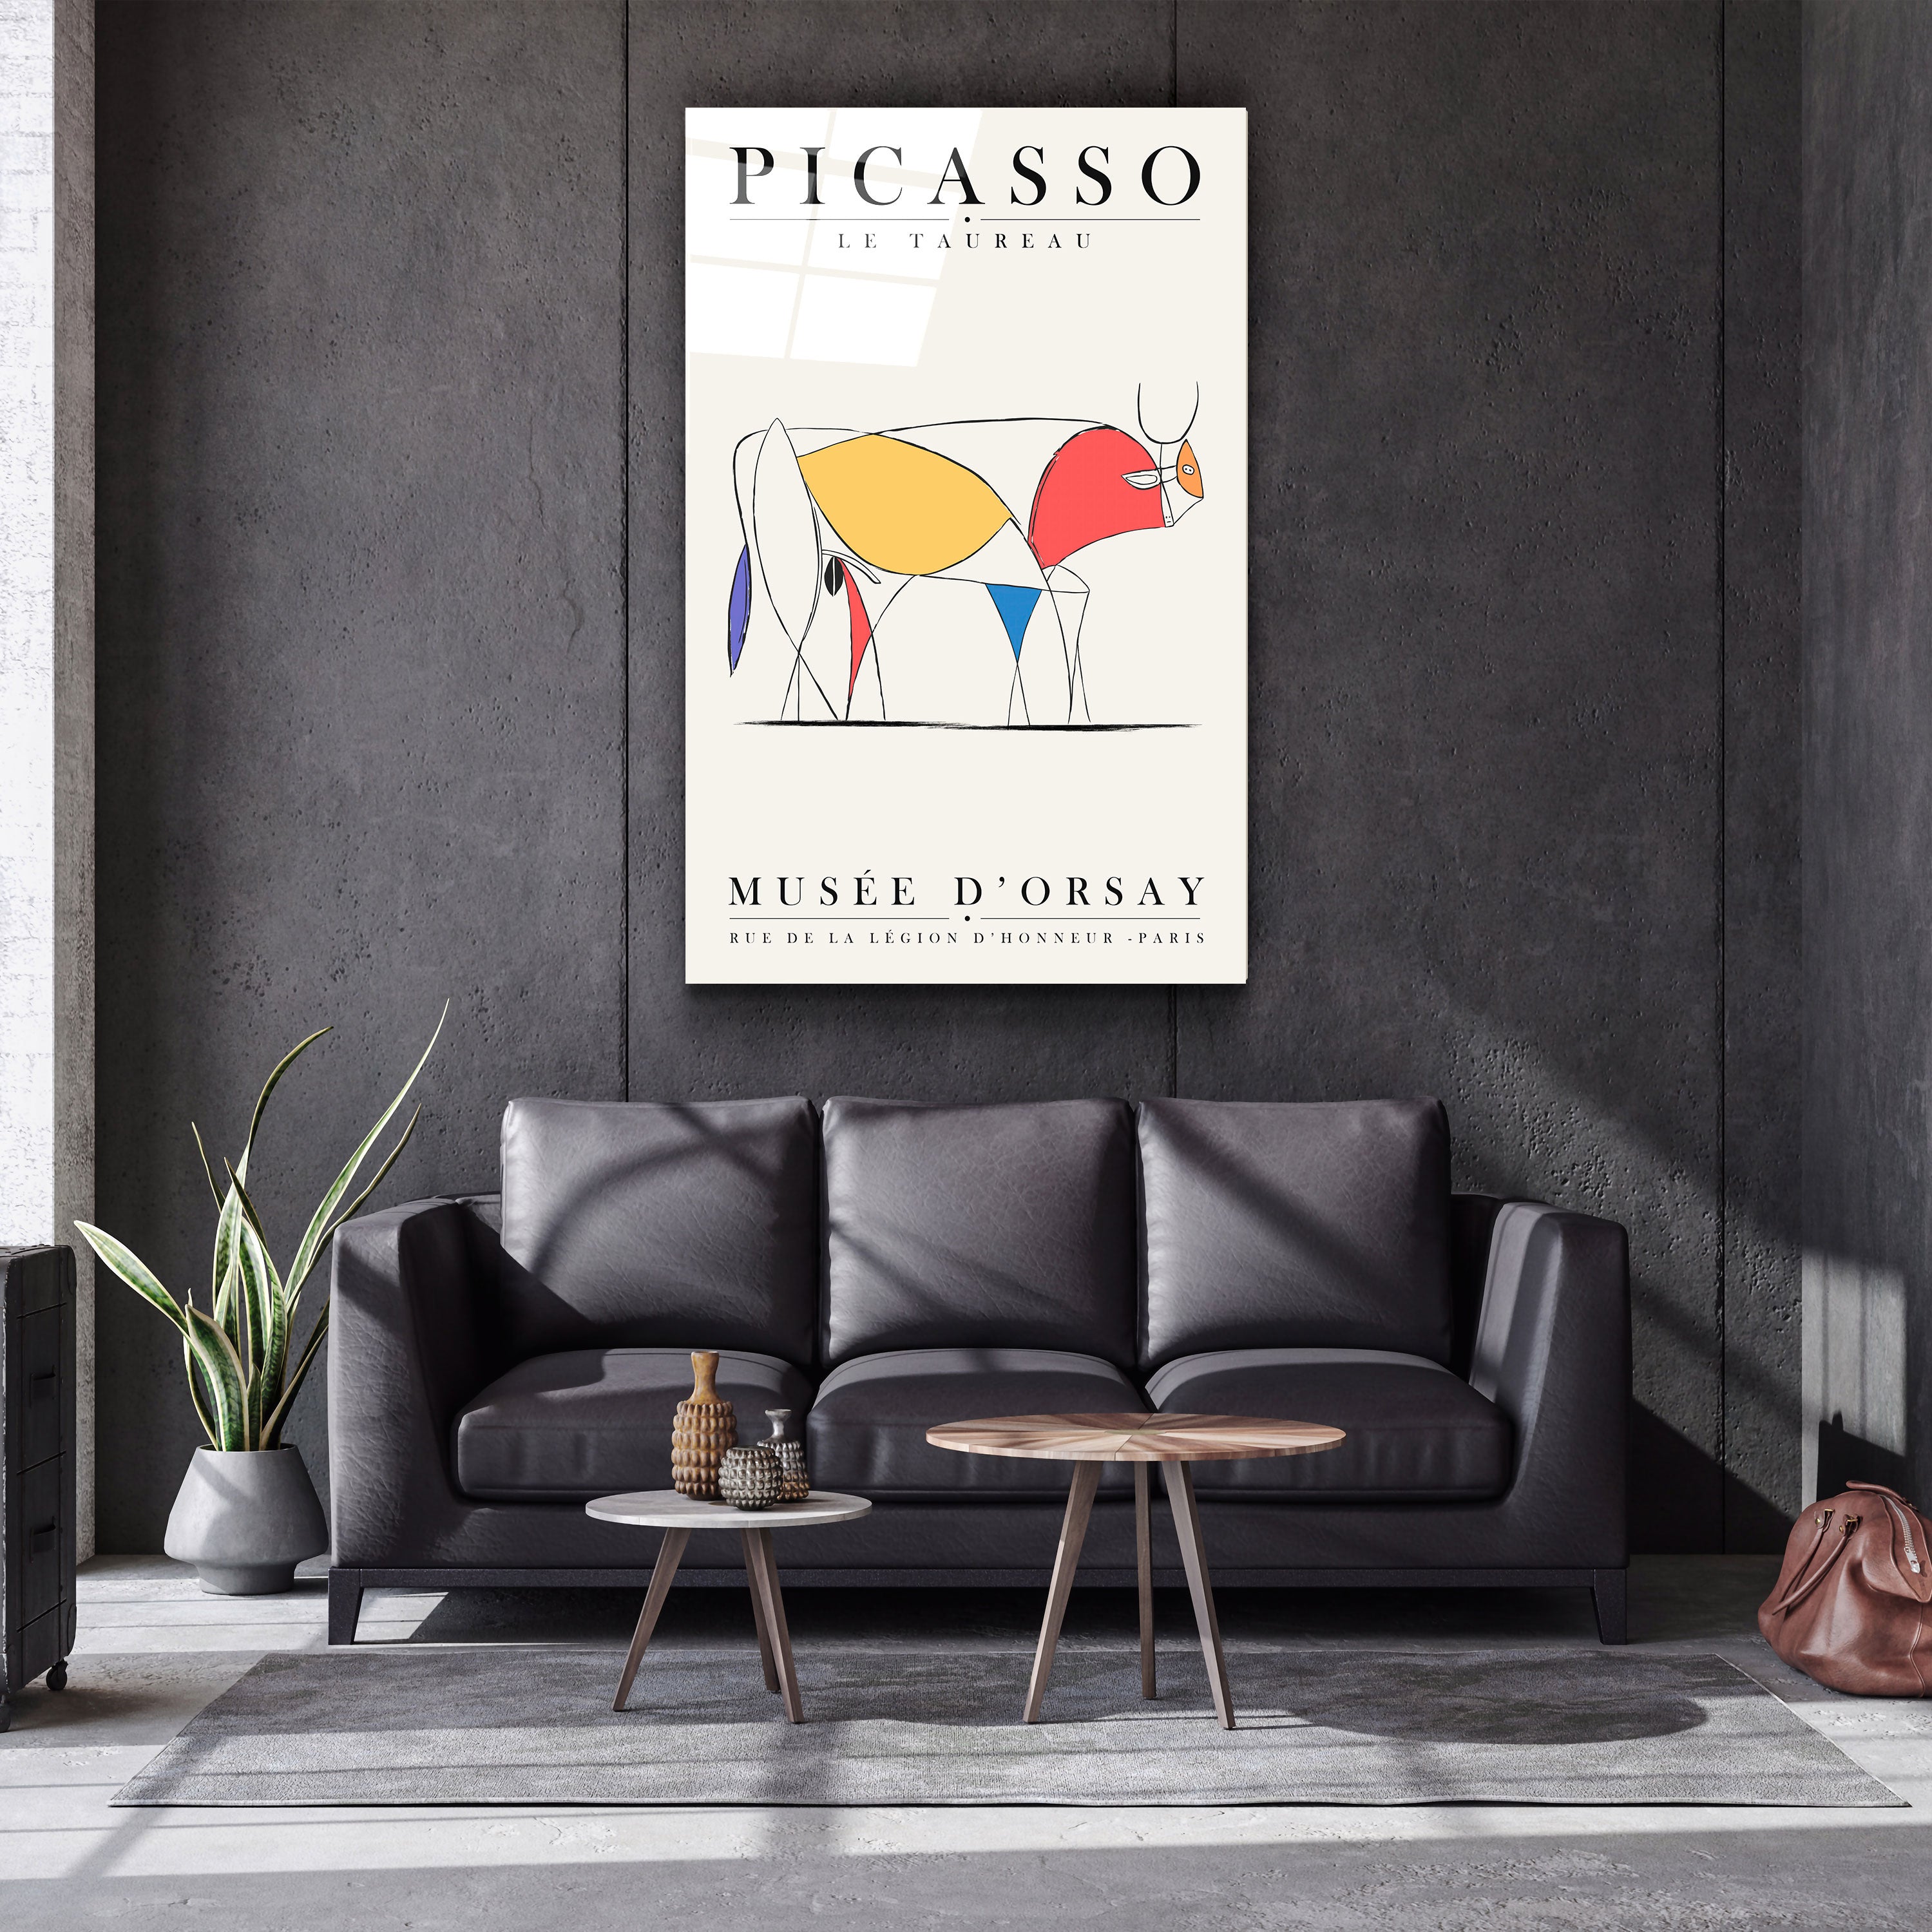 ・"Pablo Picasso - Le Taureau"・Gallery Print Collection Glass Wall Art